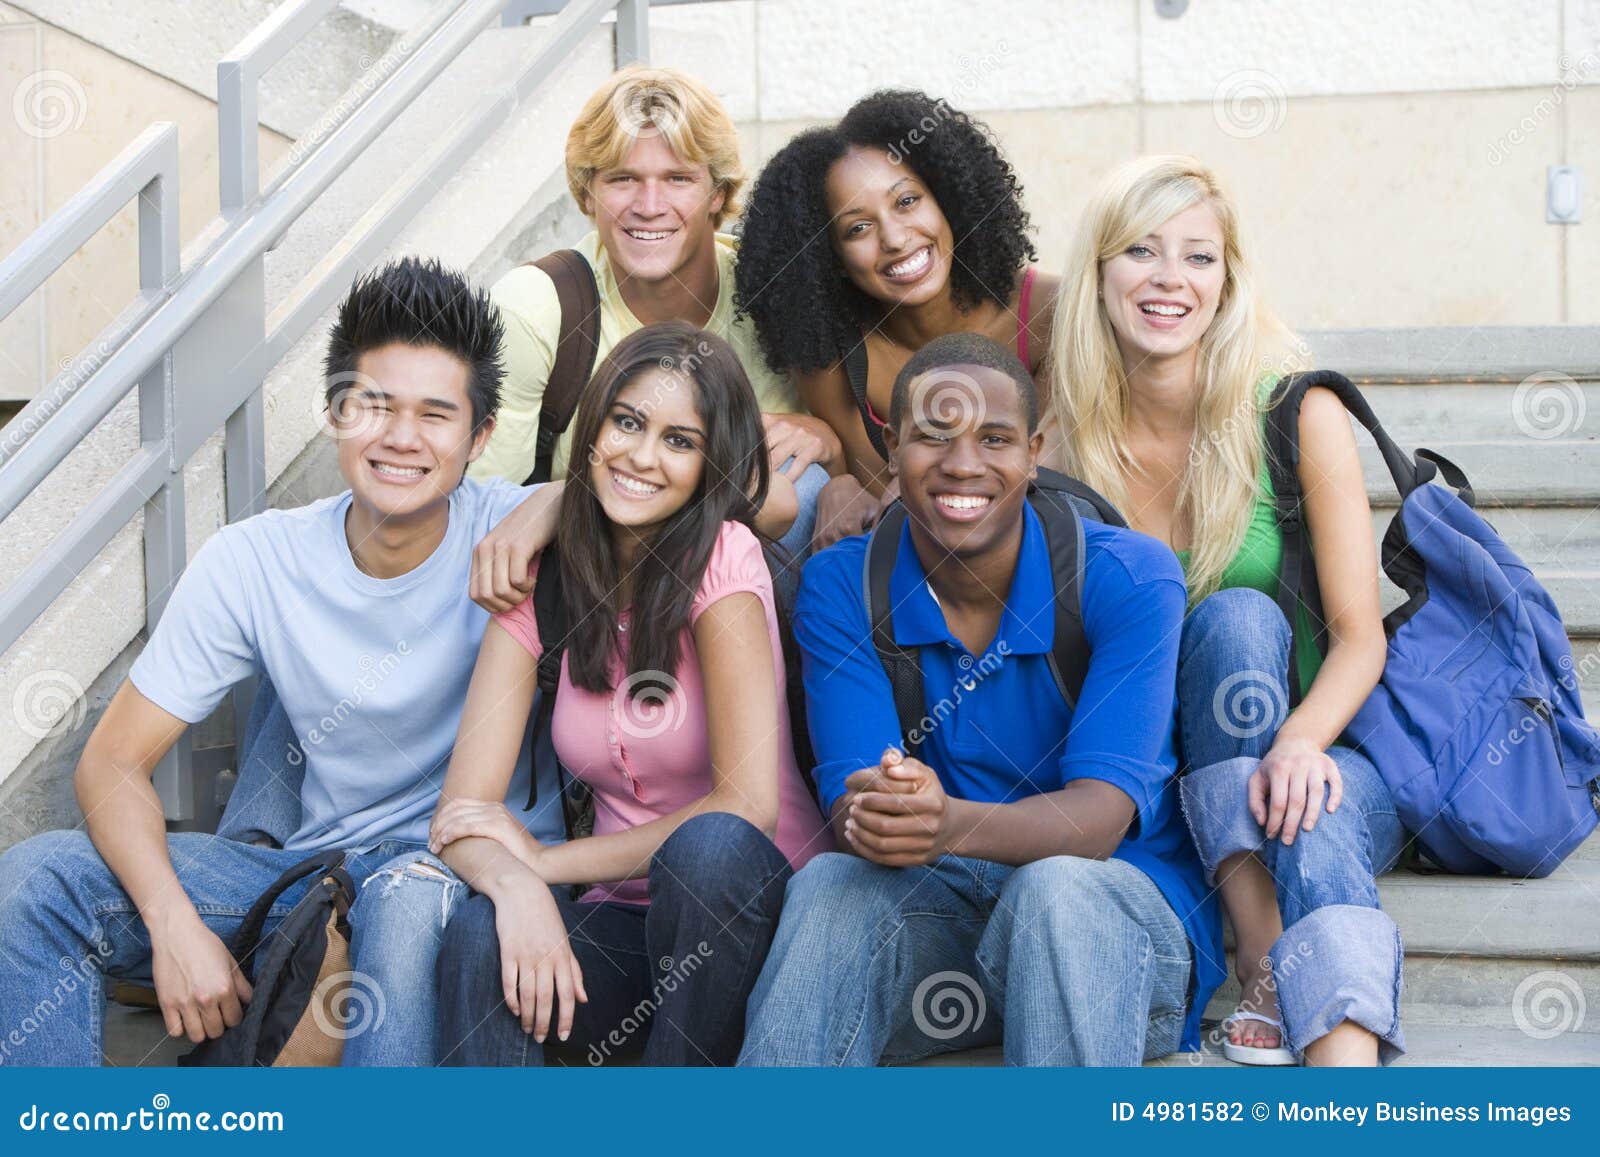 group of university students sitting on steps